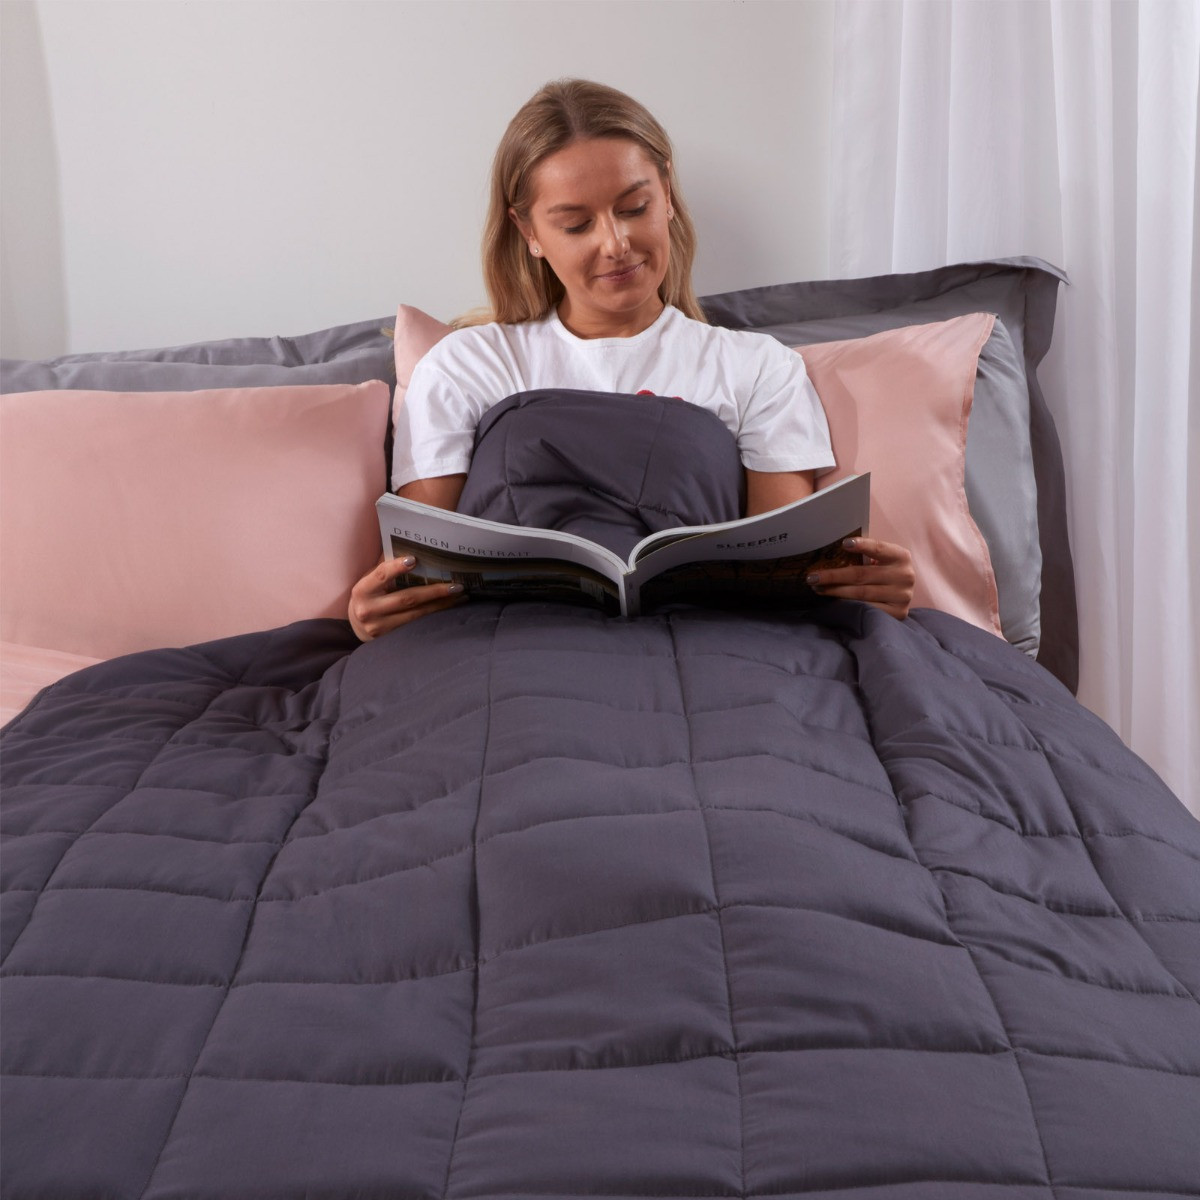 Highams Weighted Blanket Quilted Grey, 125 x 180 cm - 6kg>